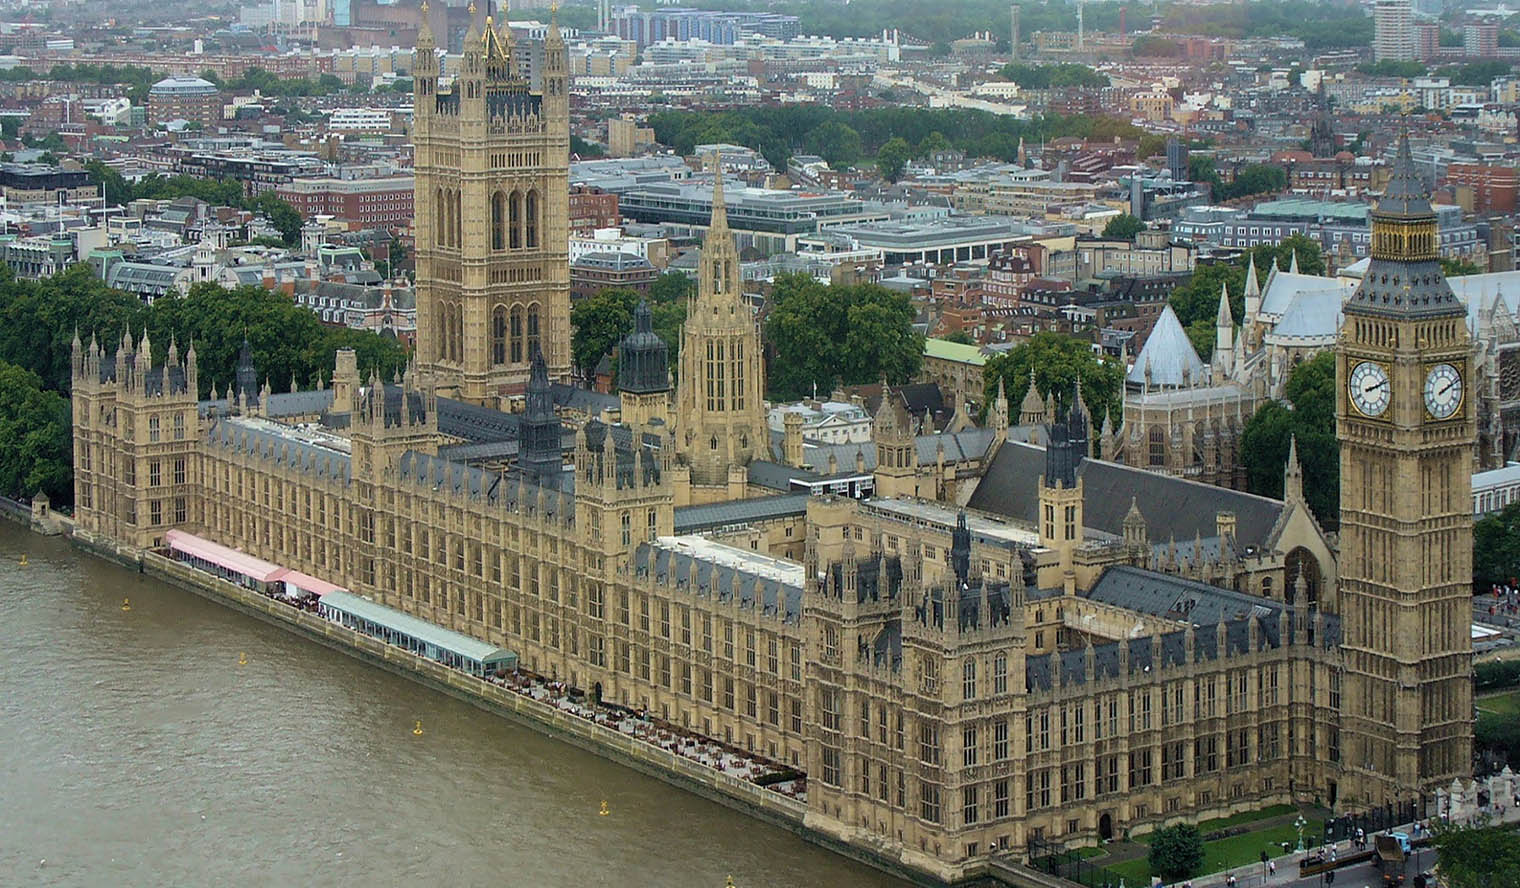 The Thames River and Westminster Palace, which houses the Houses of Parliament, from above.